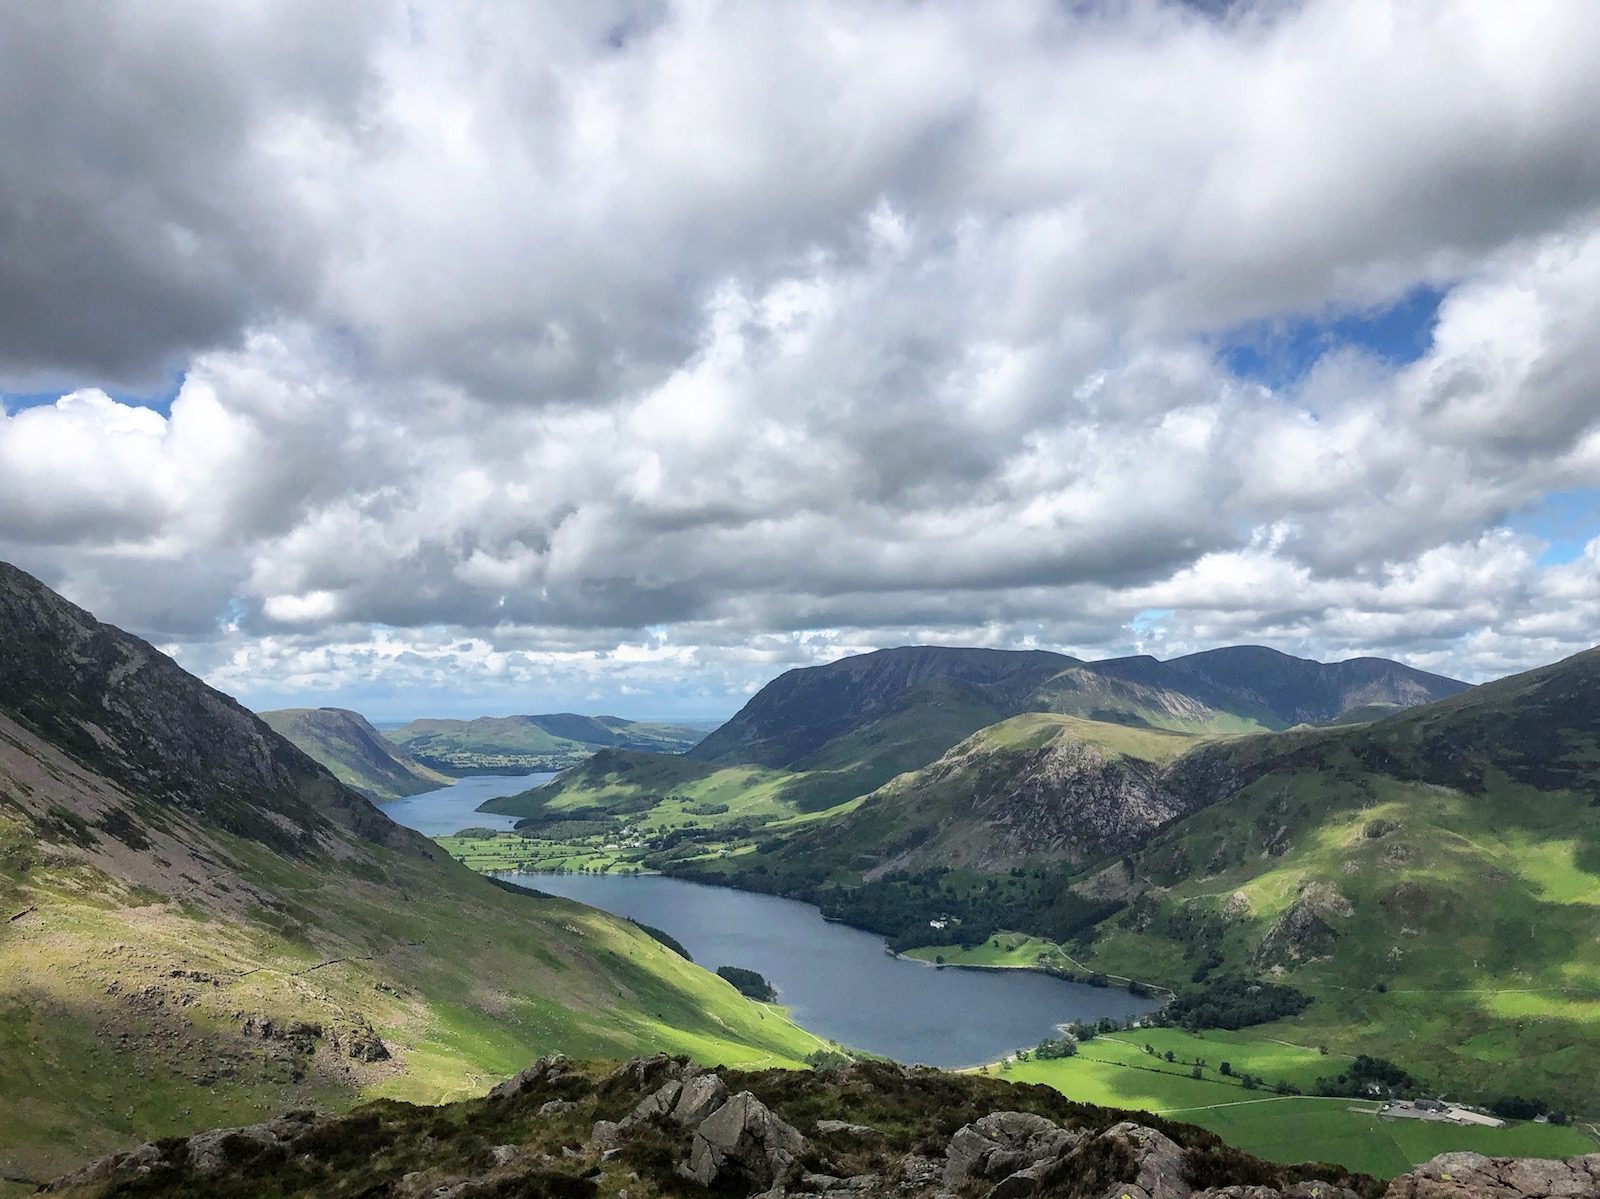 Walk up Haystacks and Fleetwith Pike from Buttermere